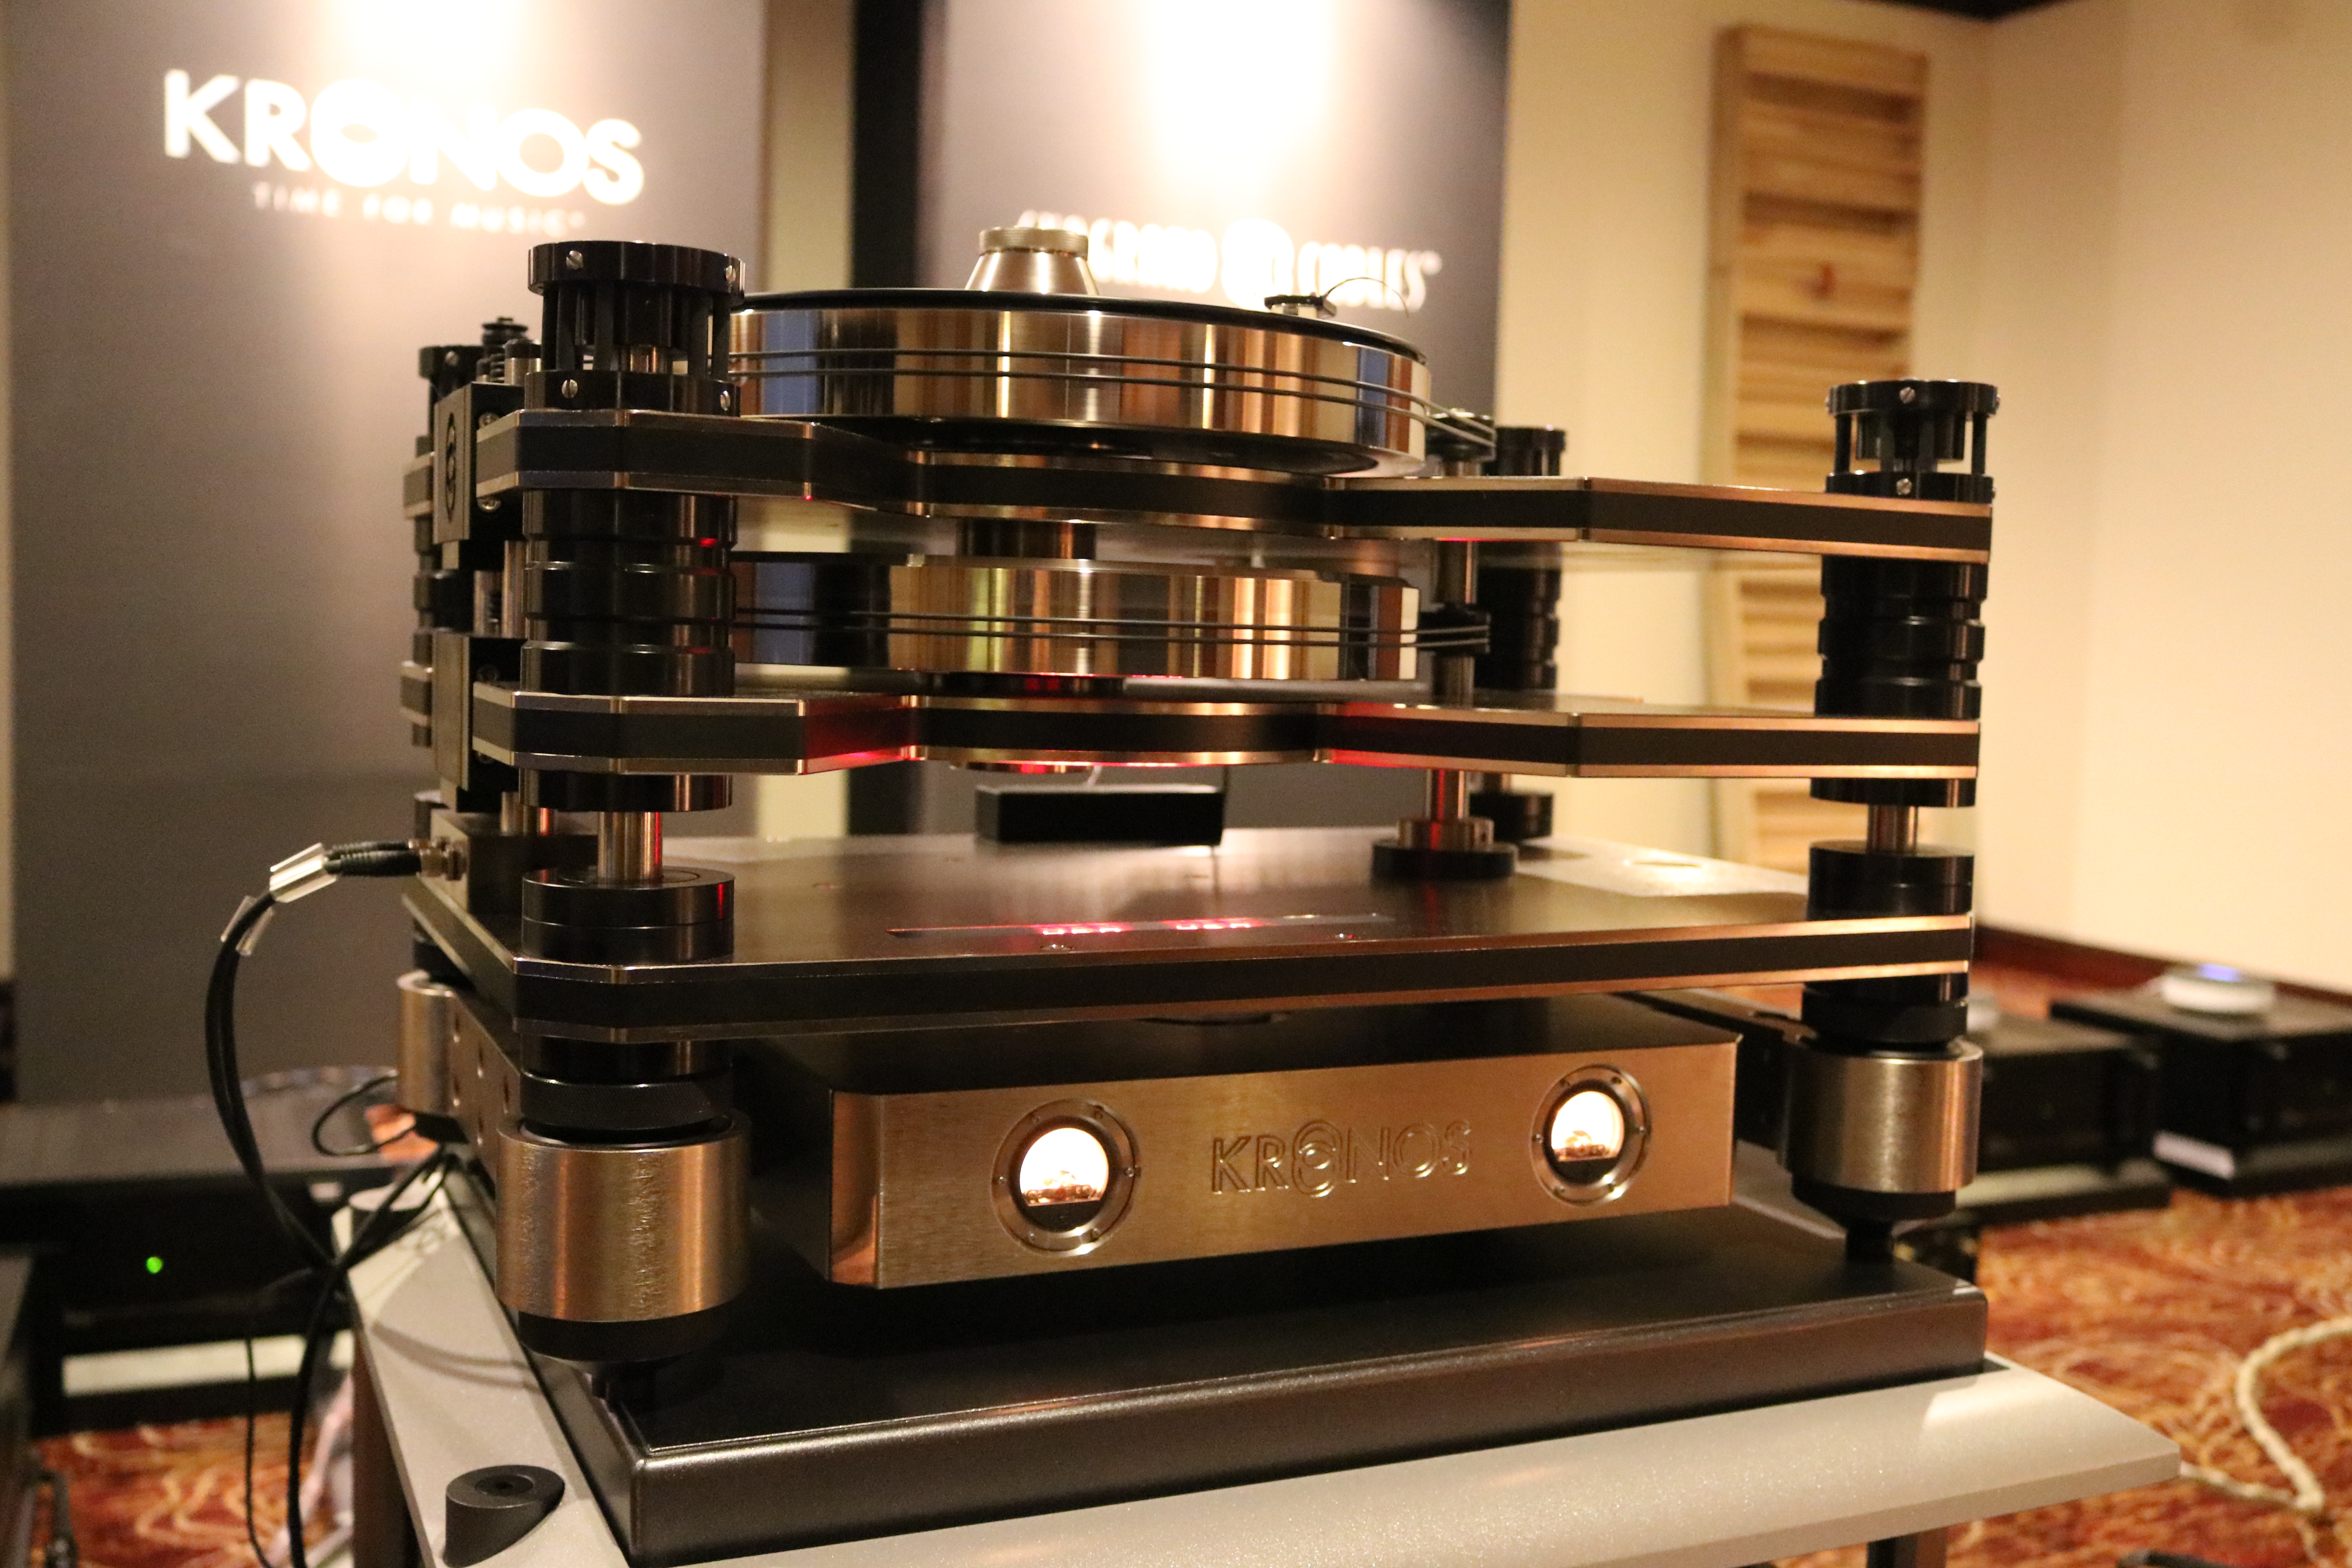 The Kronos Pro turntable and power supply